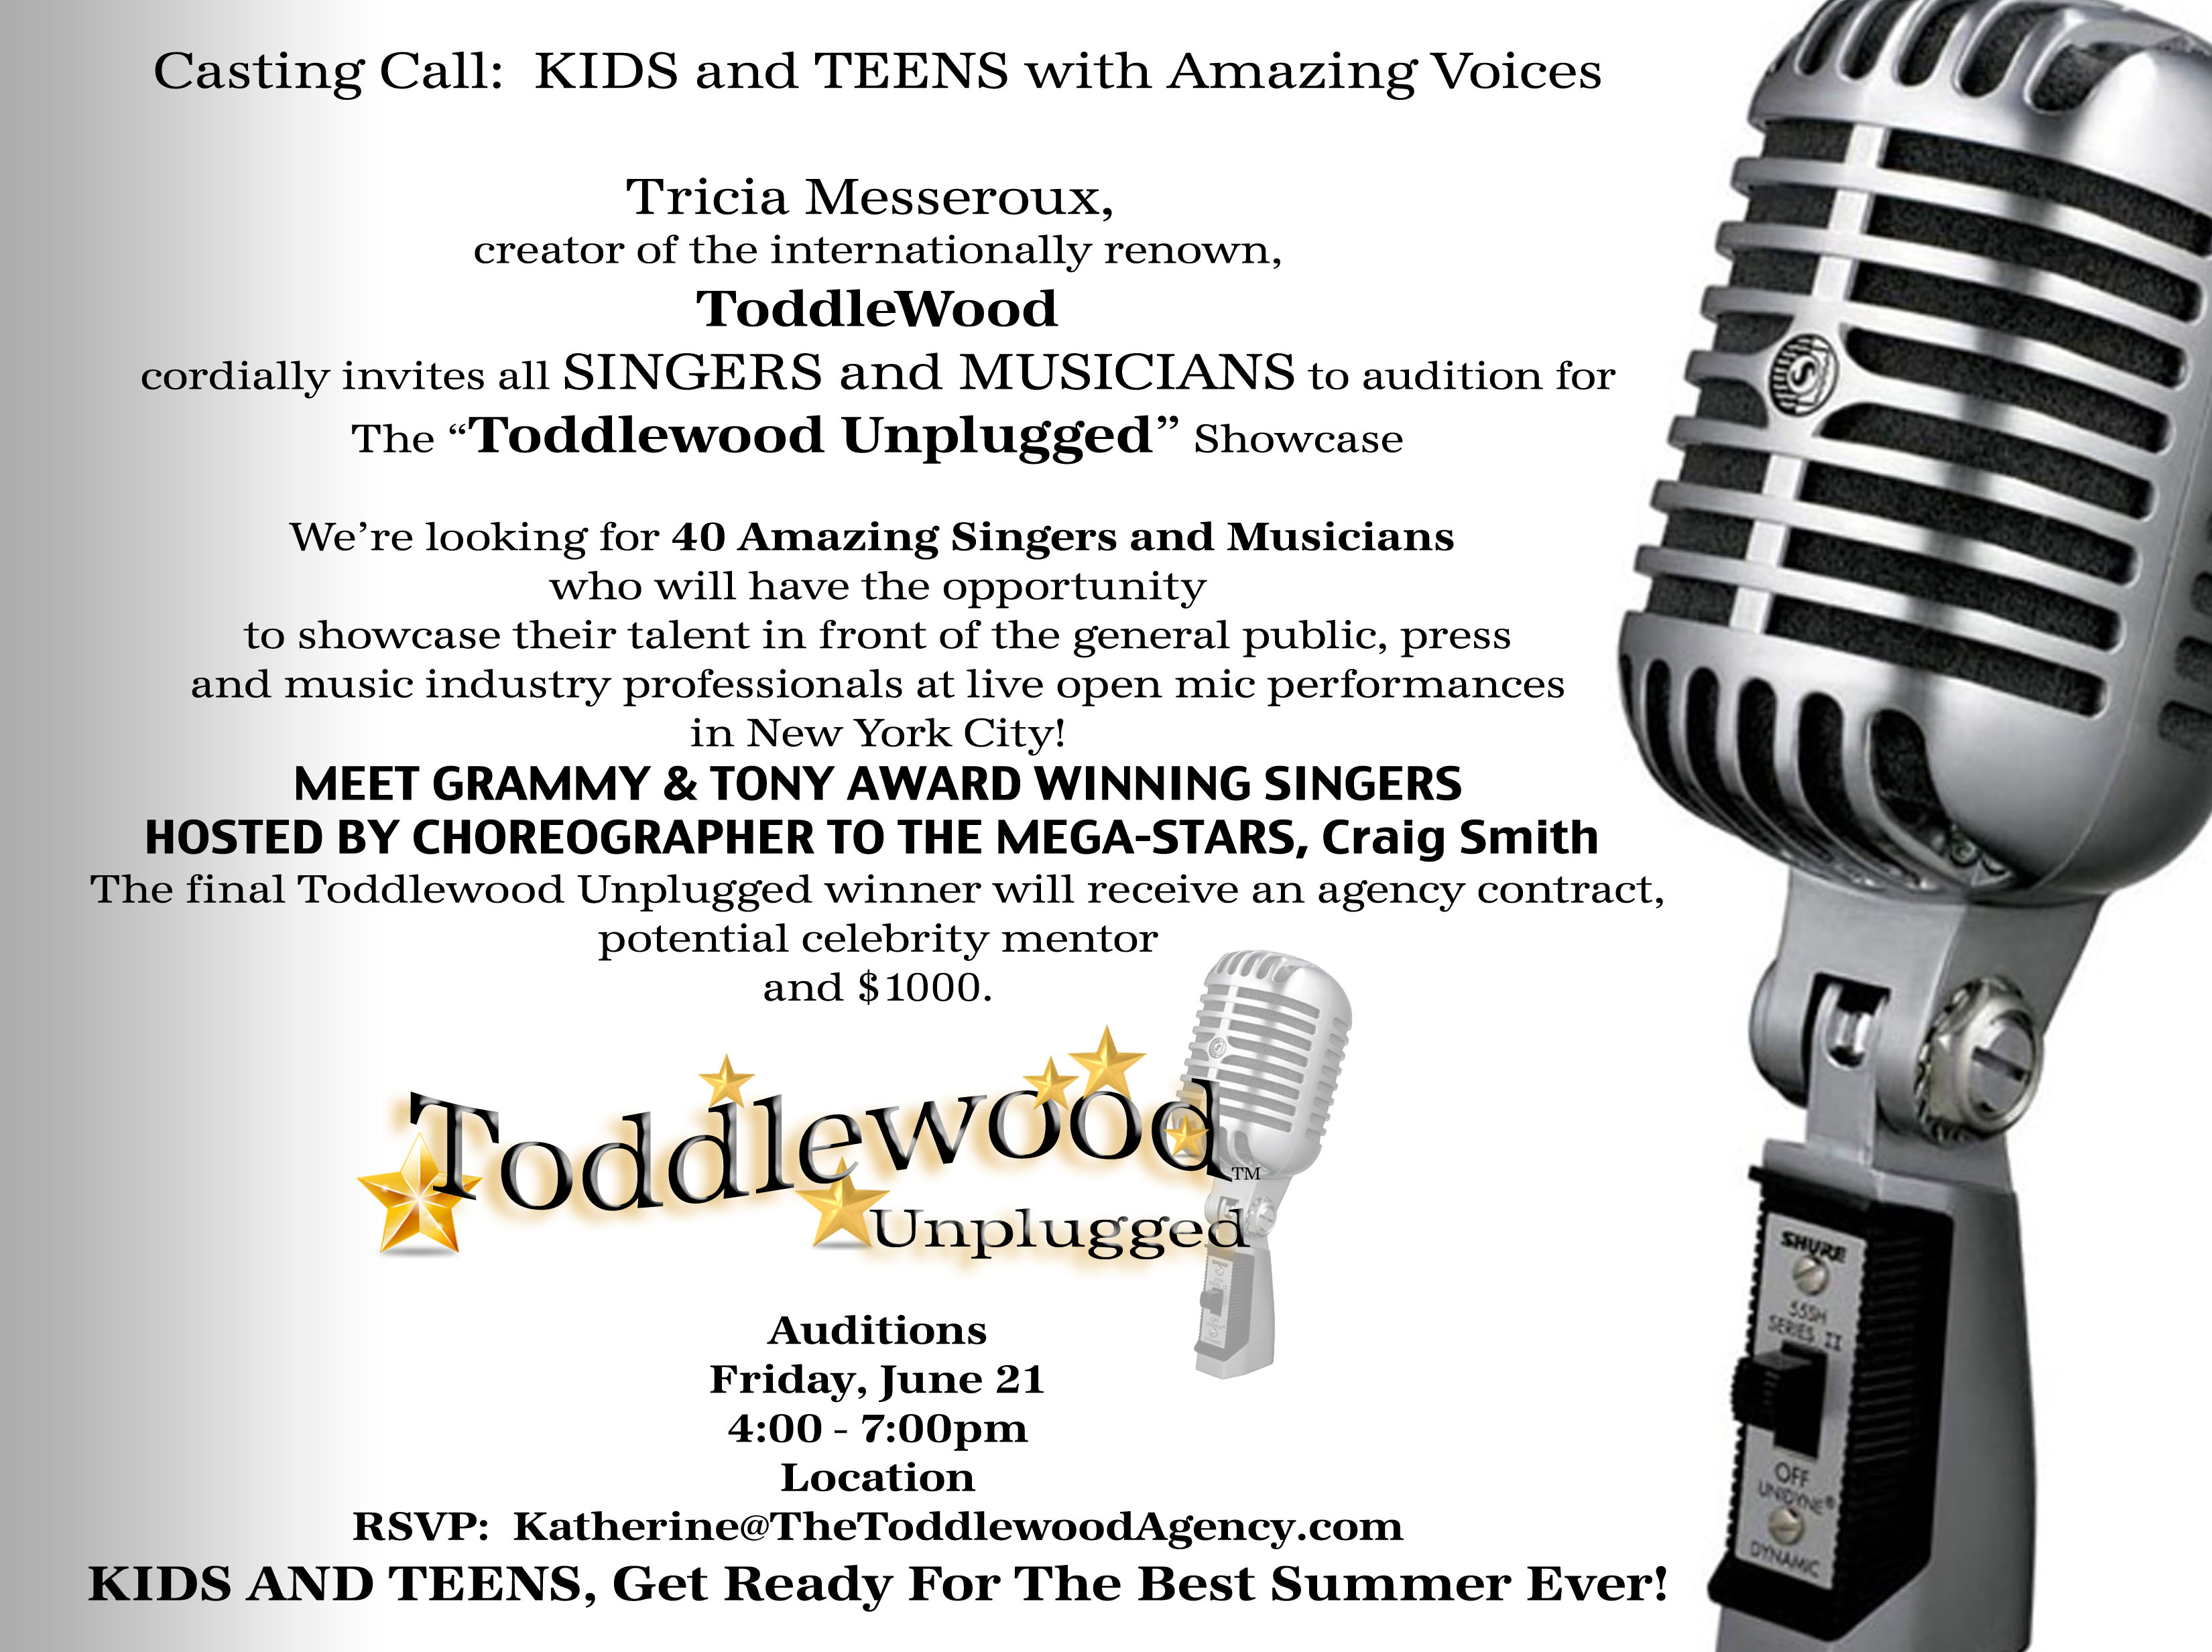 Have questions about Toddlewood Unplugged Singer Showcase? Contact 